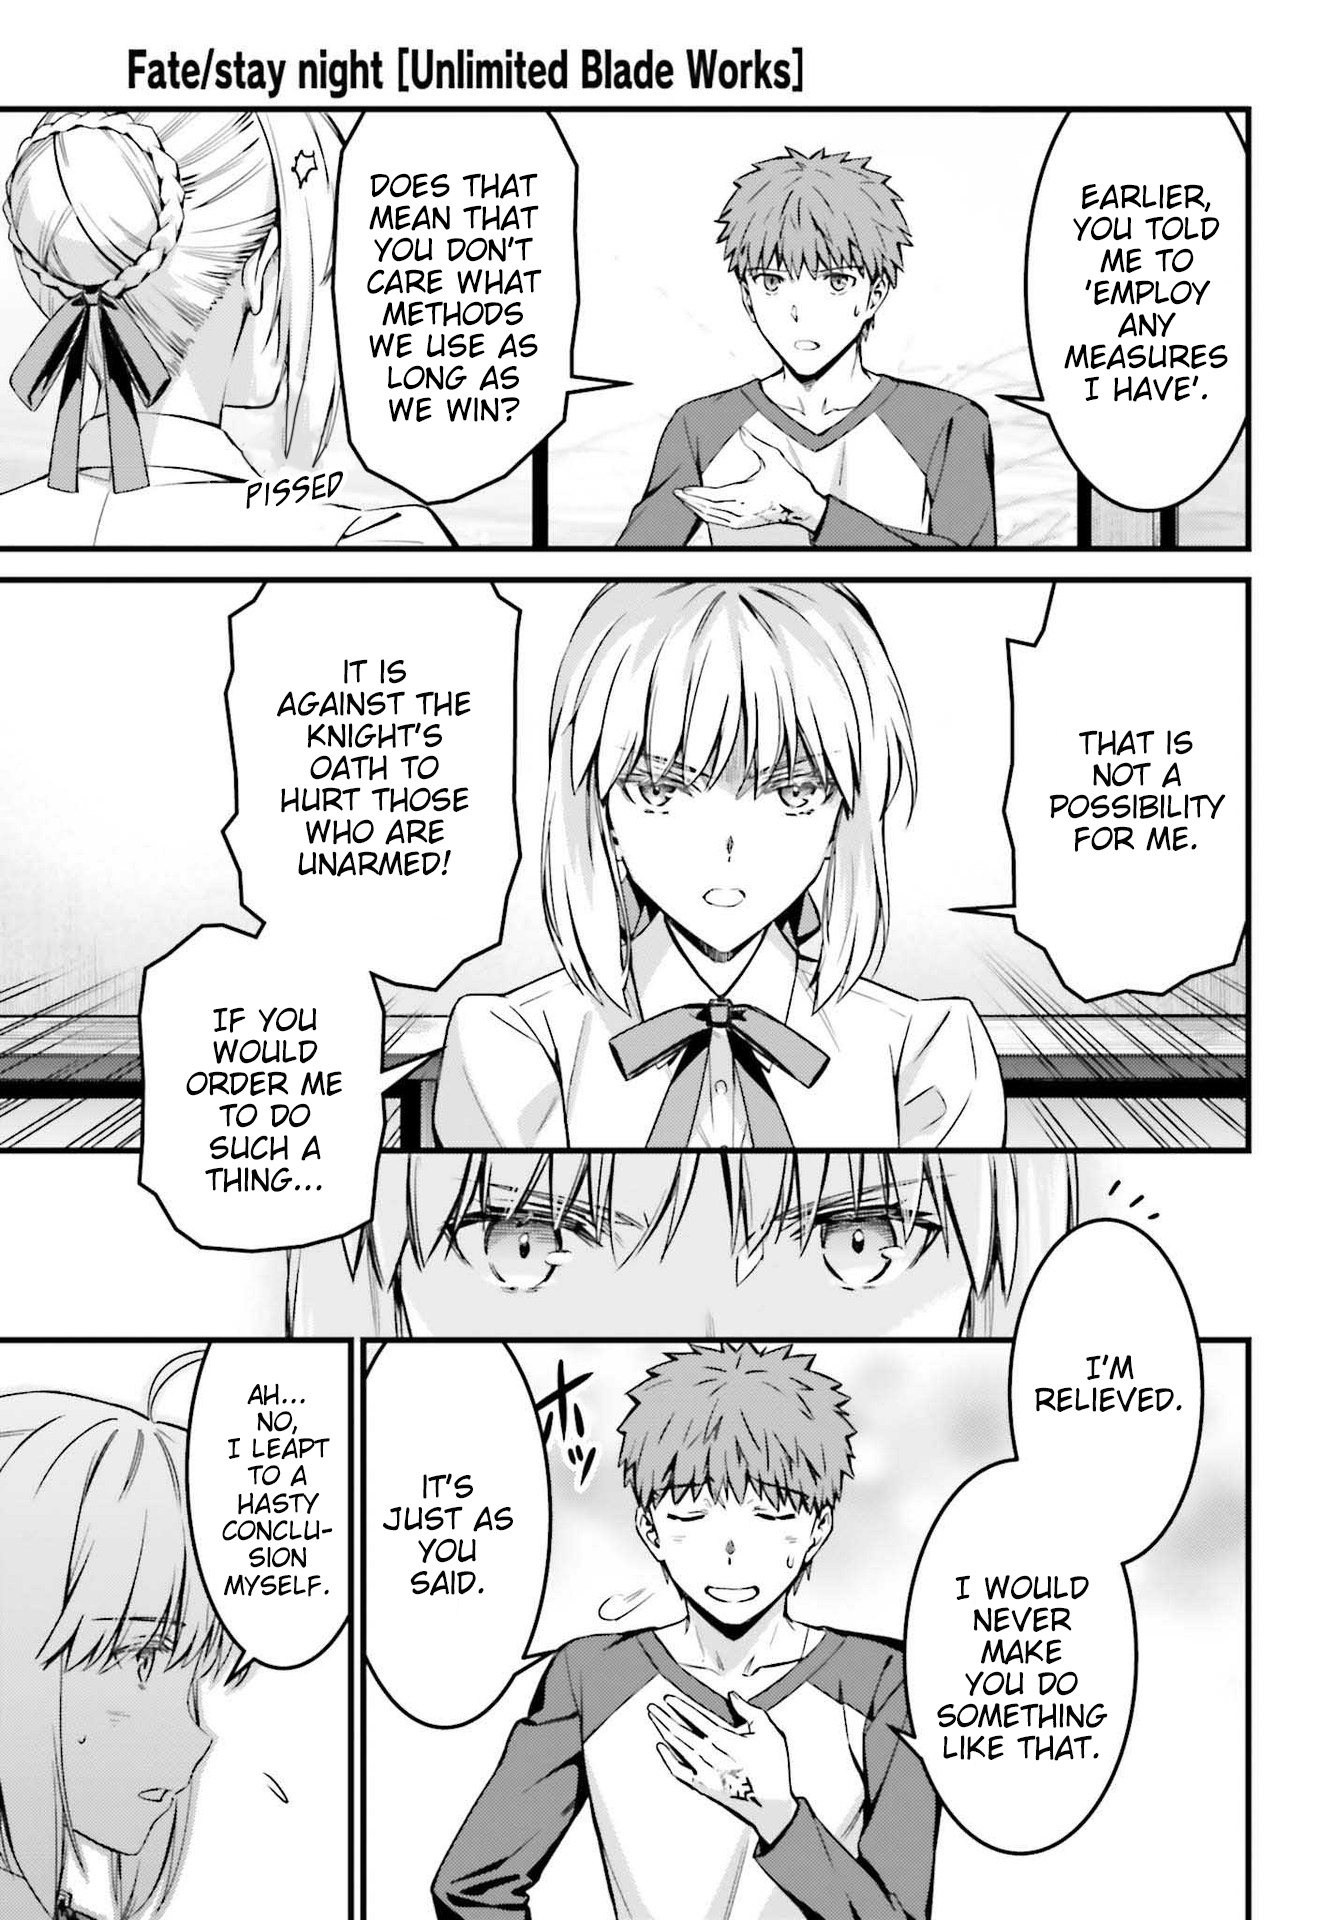 Fate/stay Night - Unlimited Blade Works - Page 2